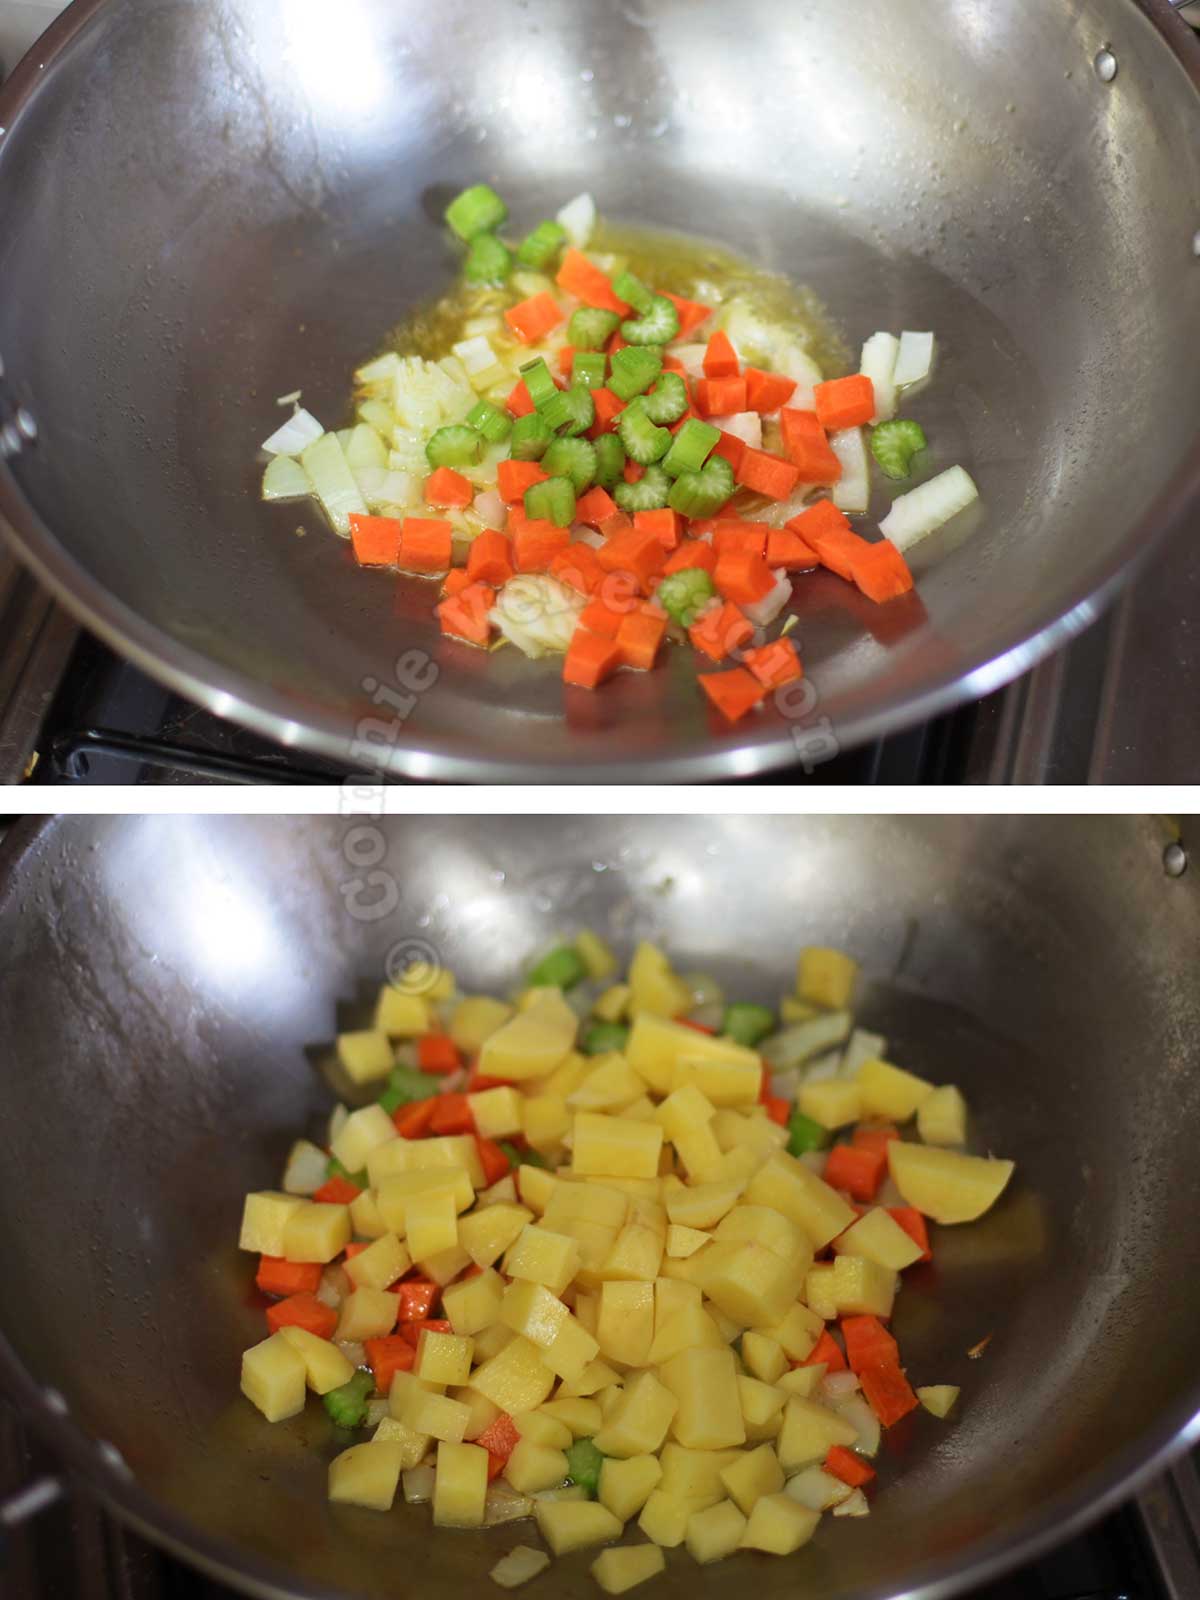 Sauteeing onion, carrot and celery in butter then adding carrot and potato